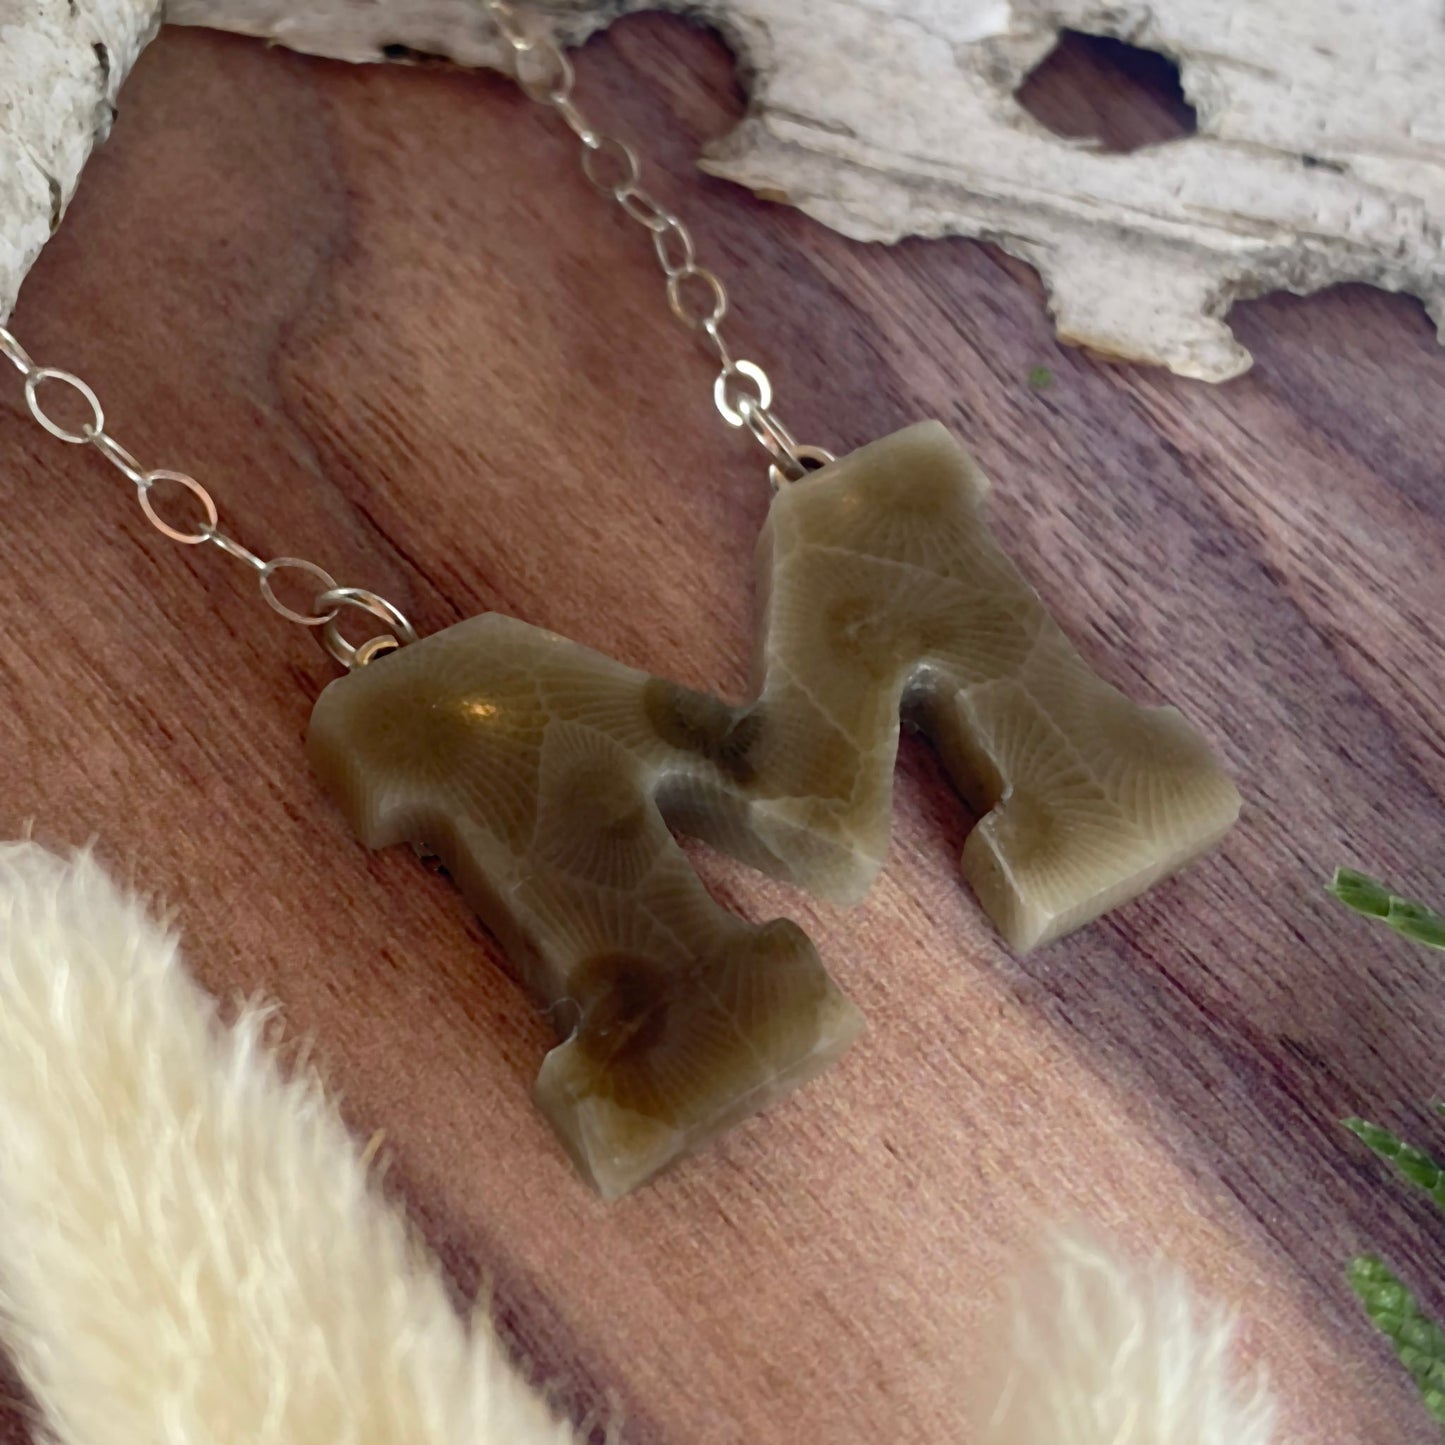 Michigan Petoskey Stone Pendant Necklace Front View II - Stone Treasures by the Lake